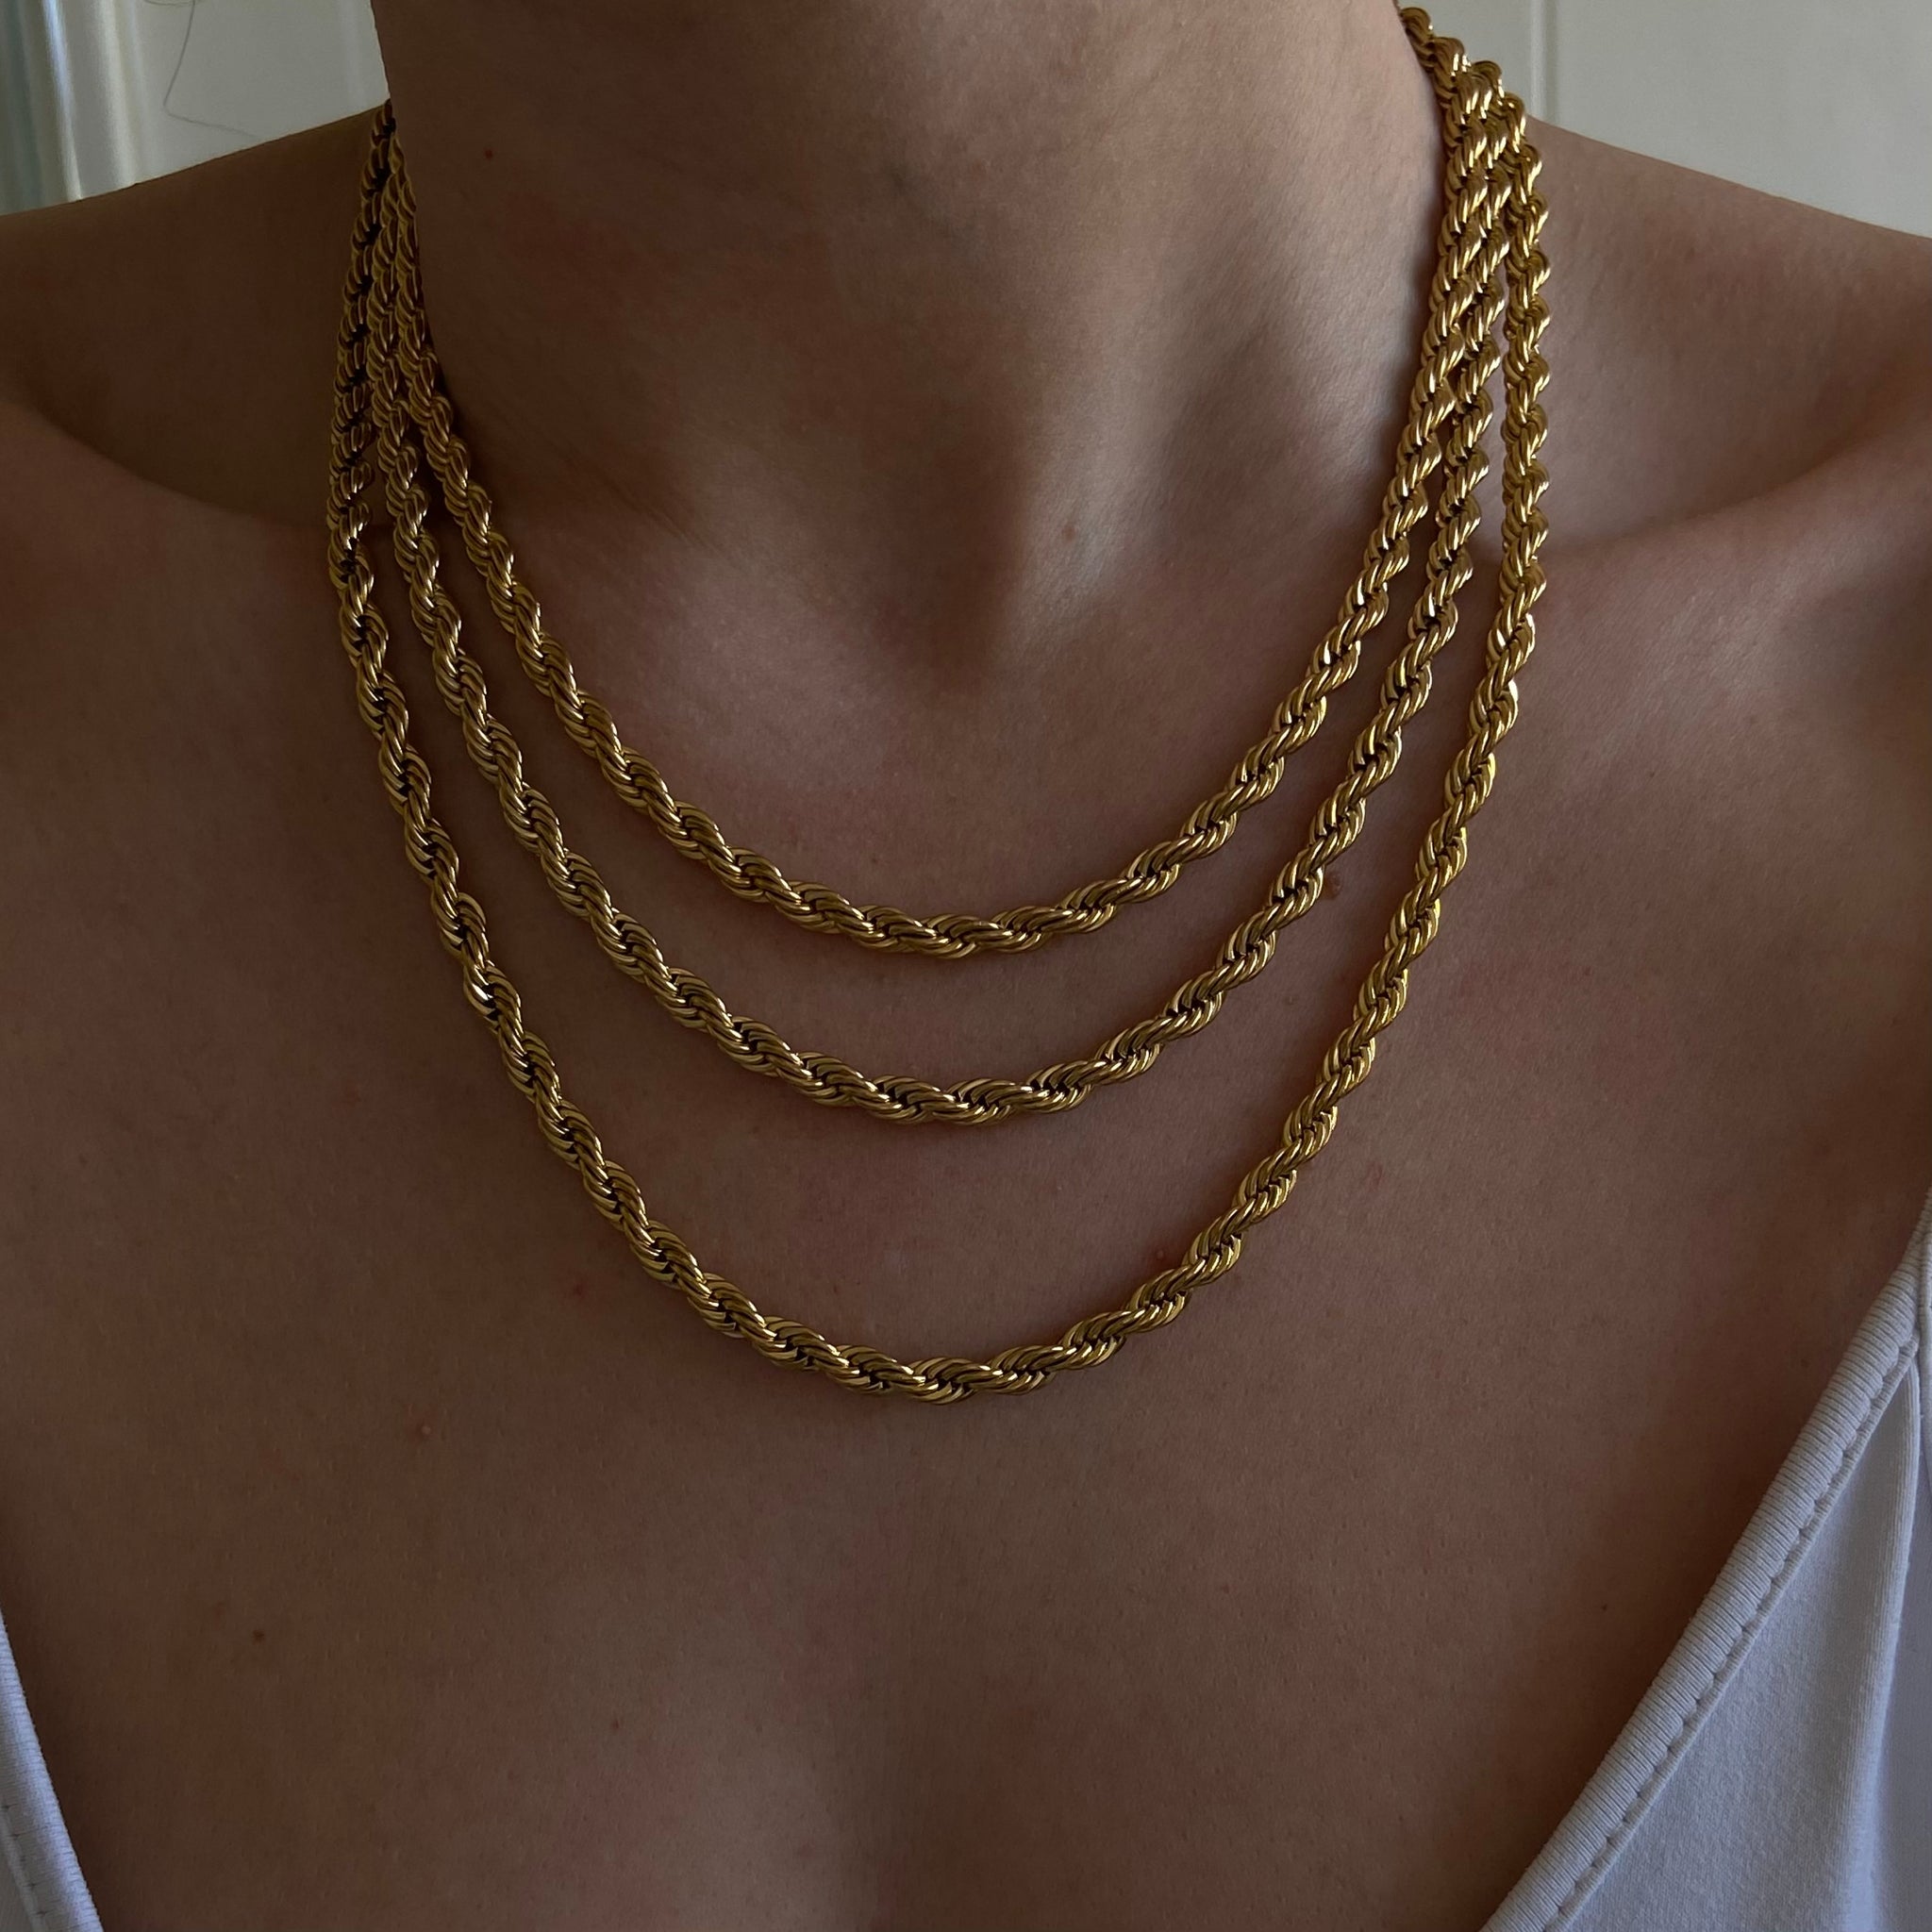 Rope Chain 5mm (sale) - Neckontheline